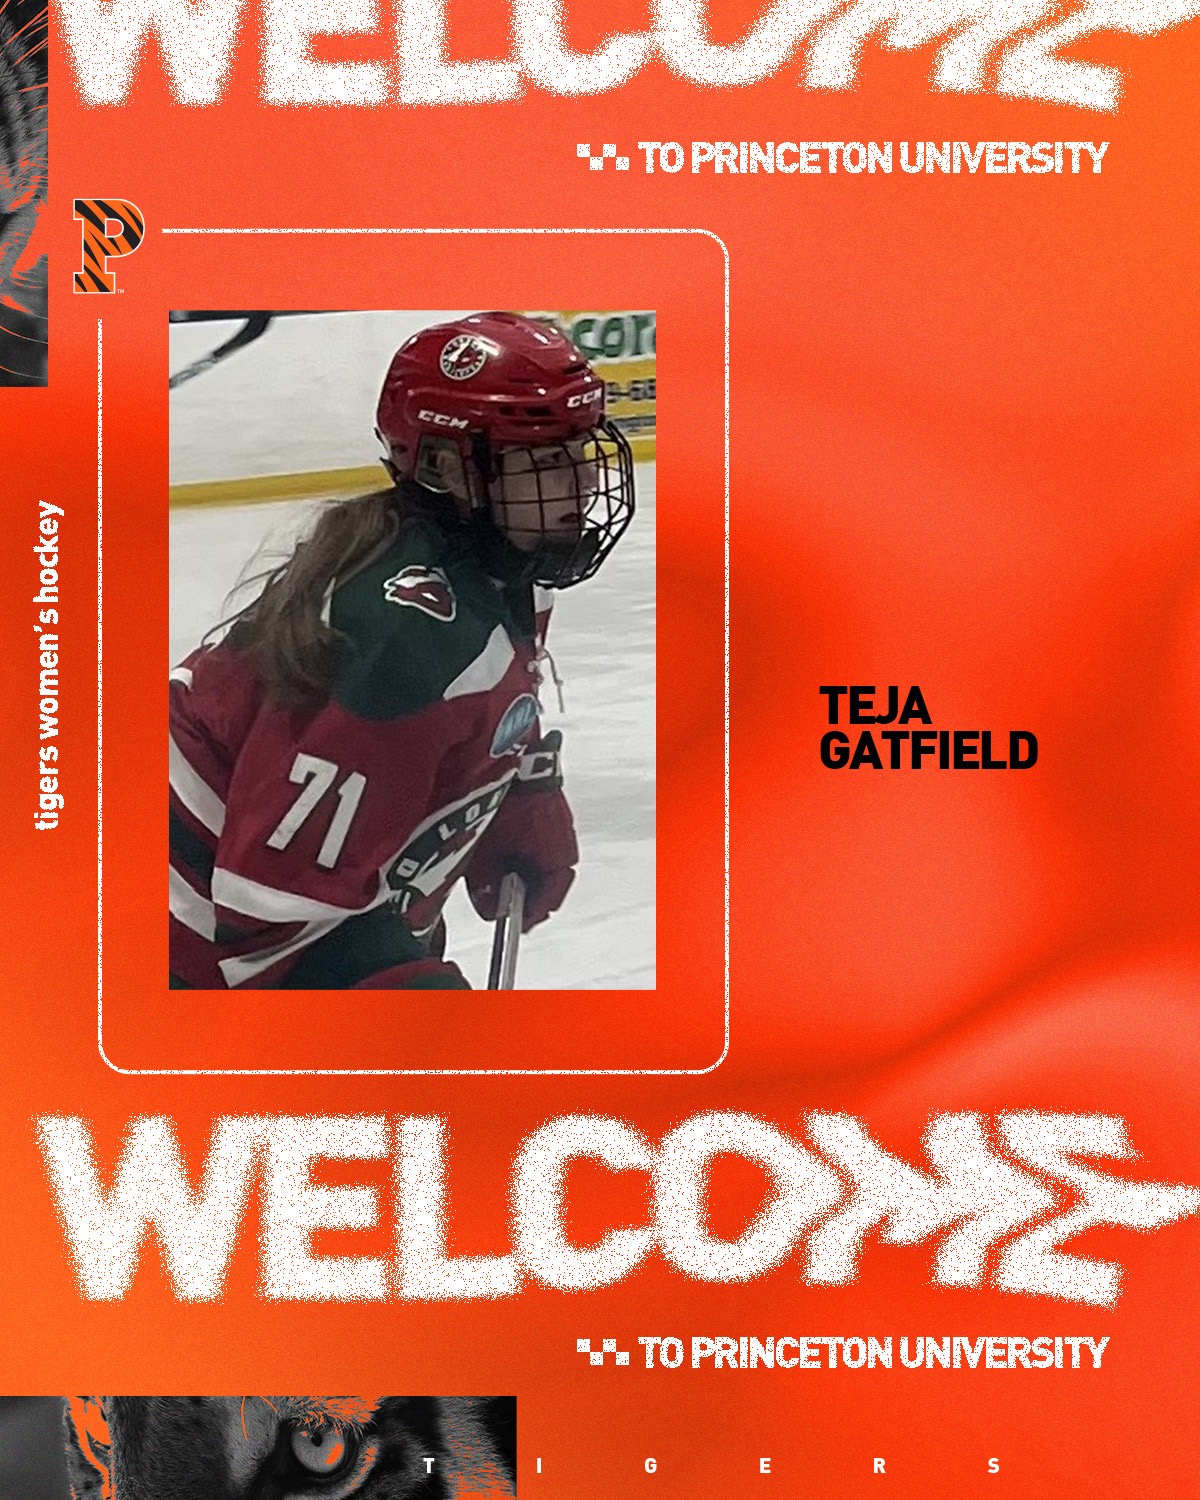 teja gatfield welcome graphic with action photo